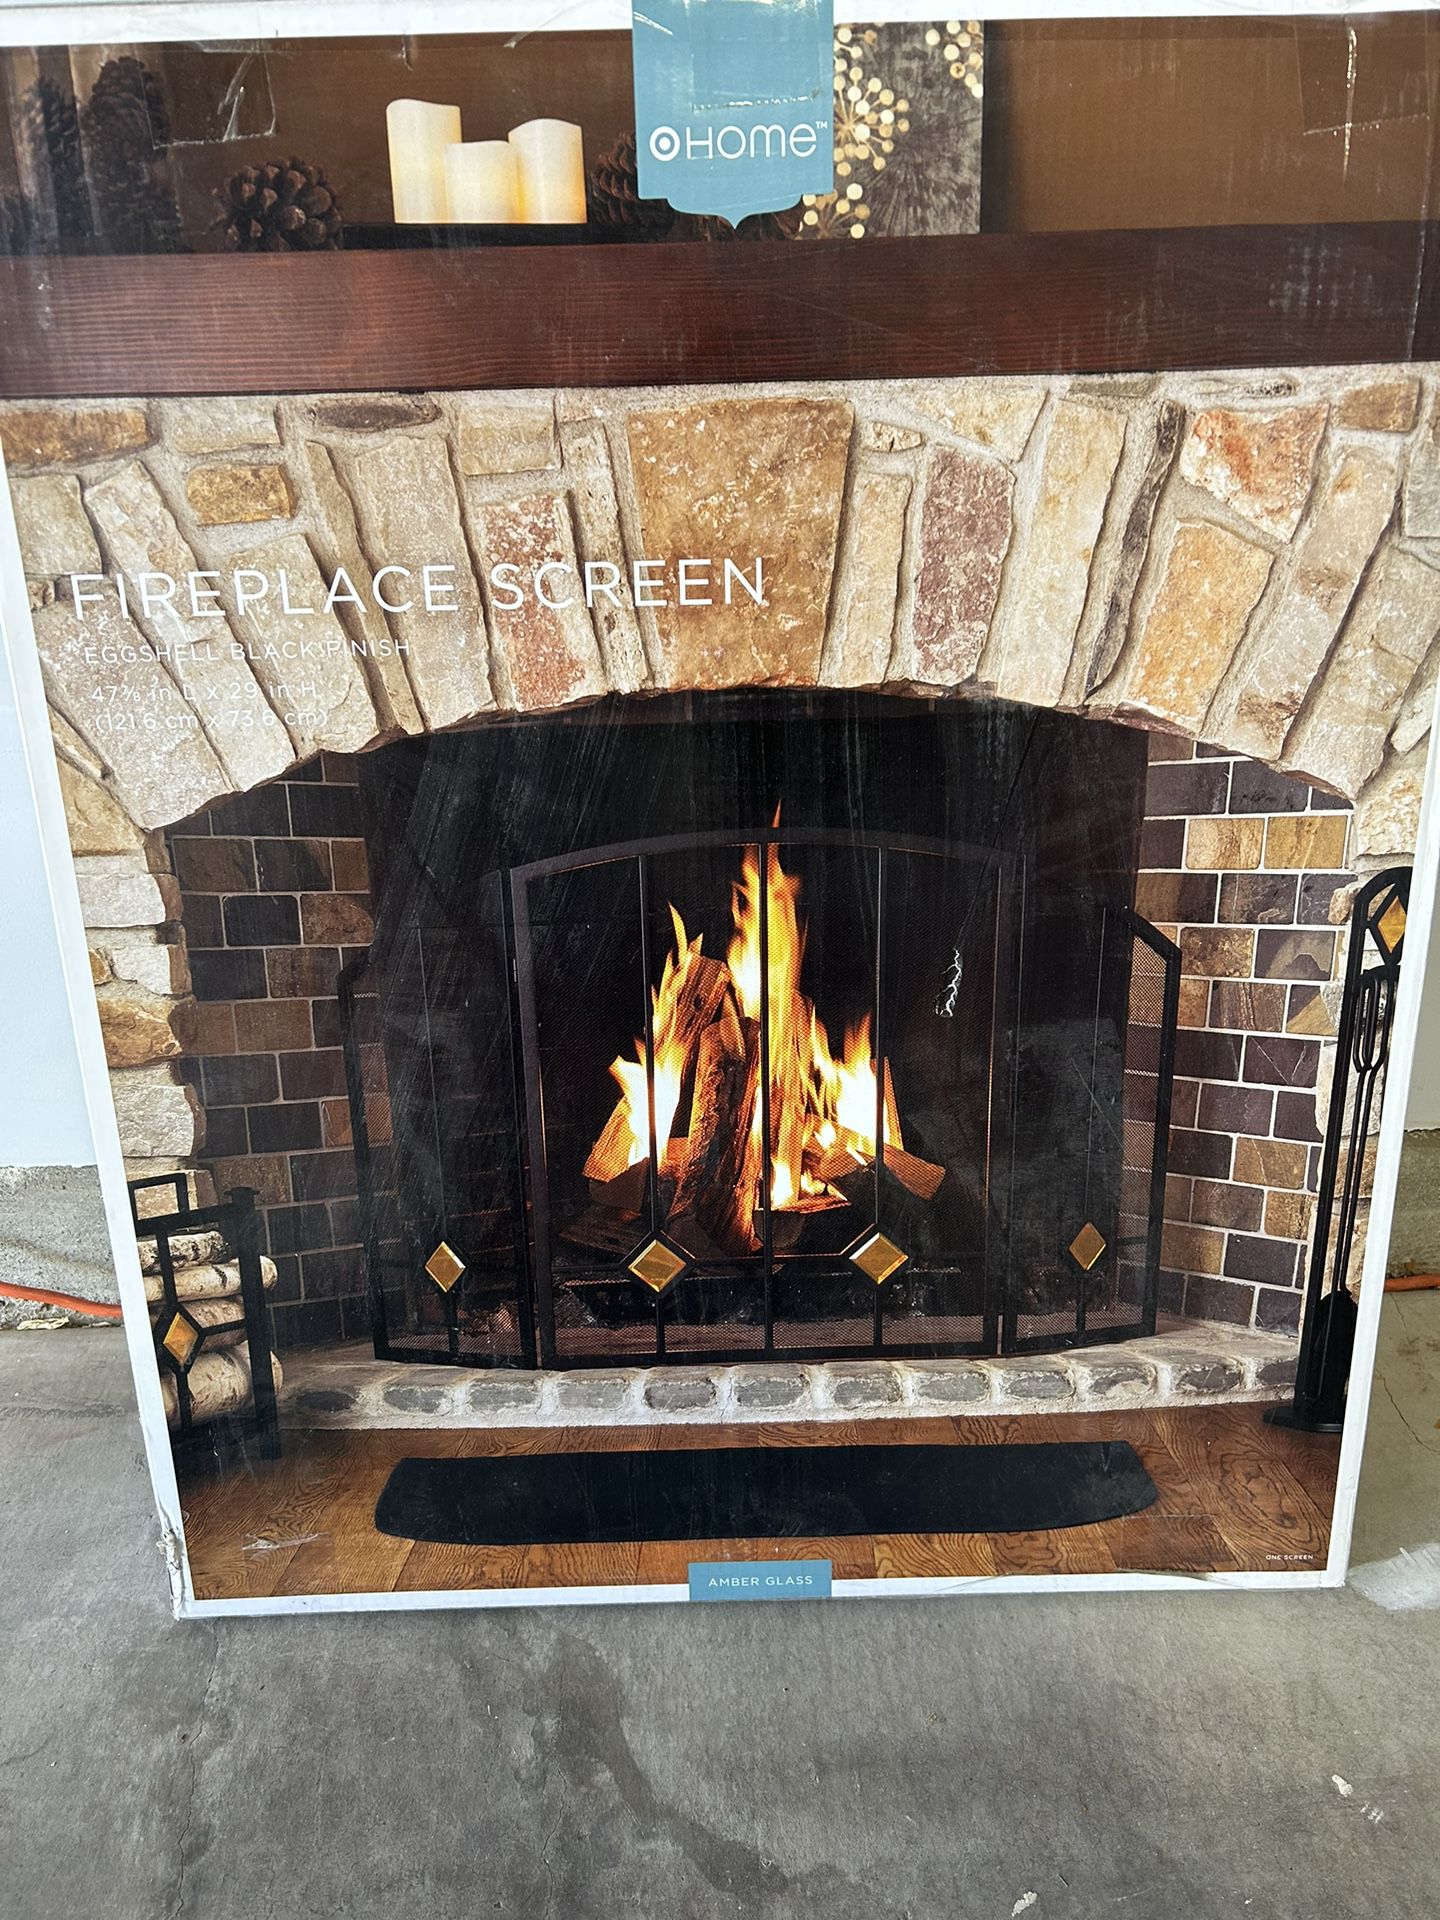 Fire Place Screen